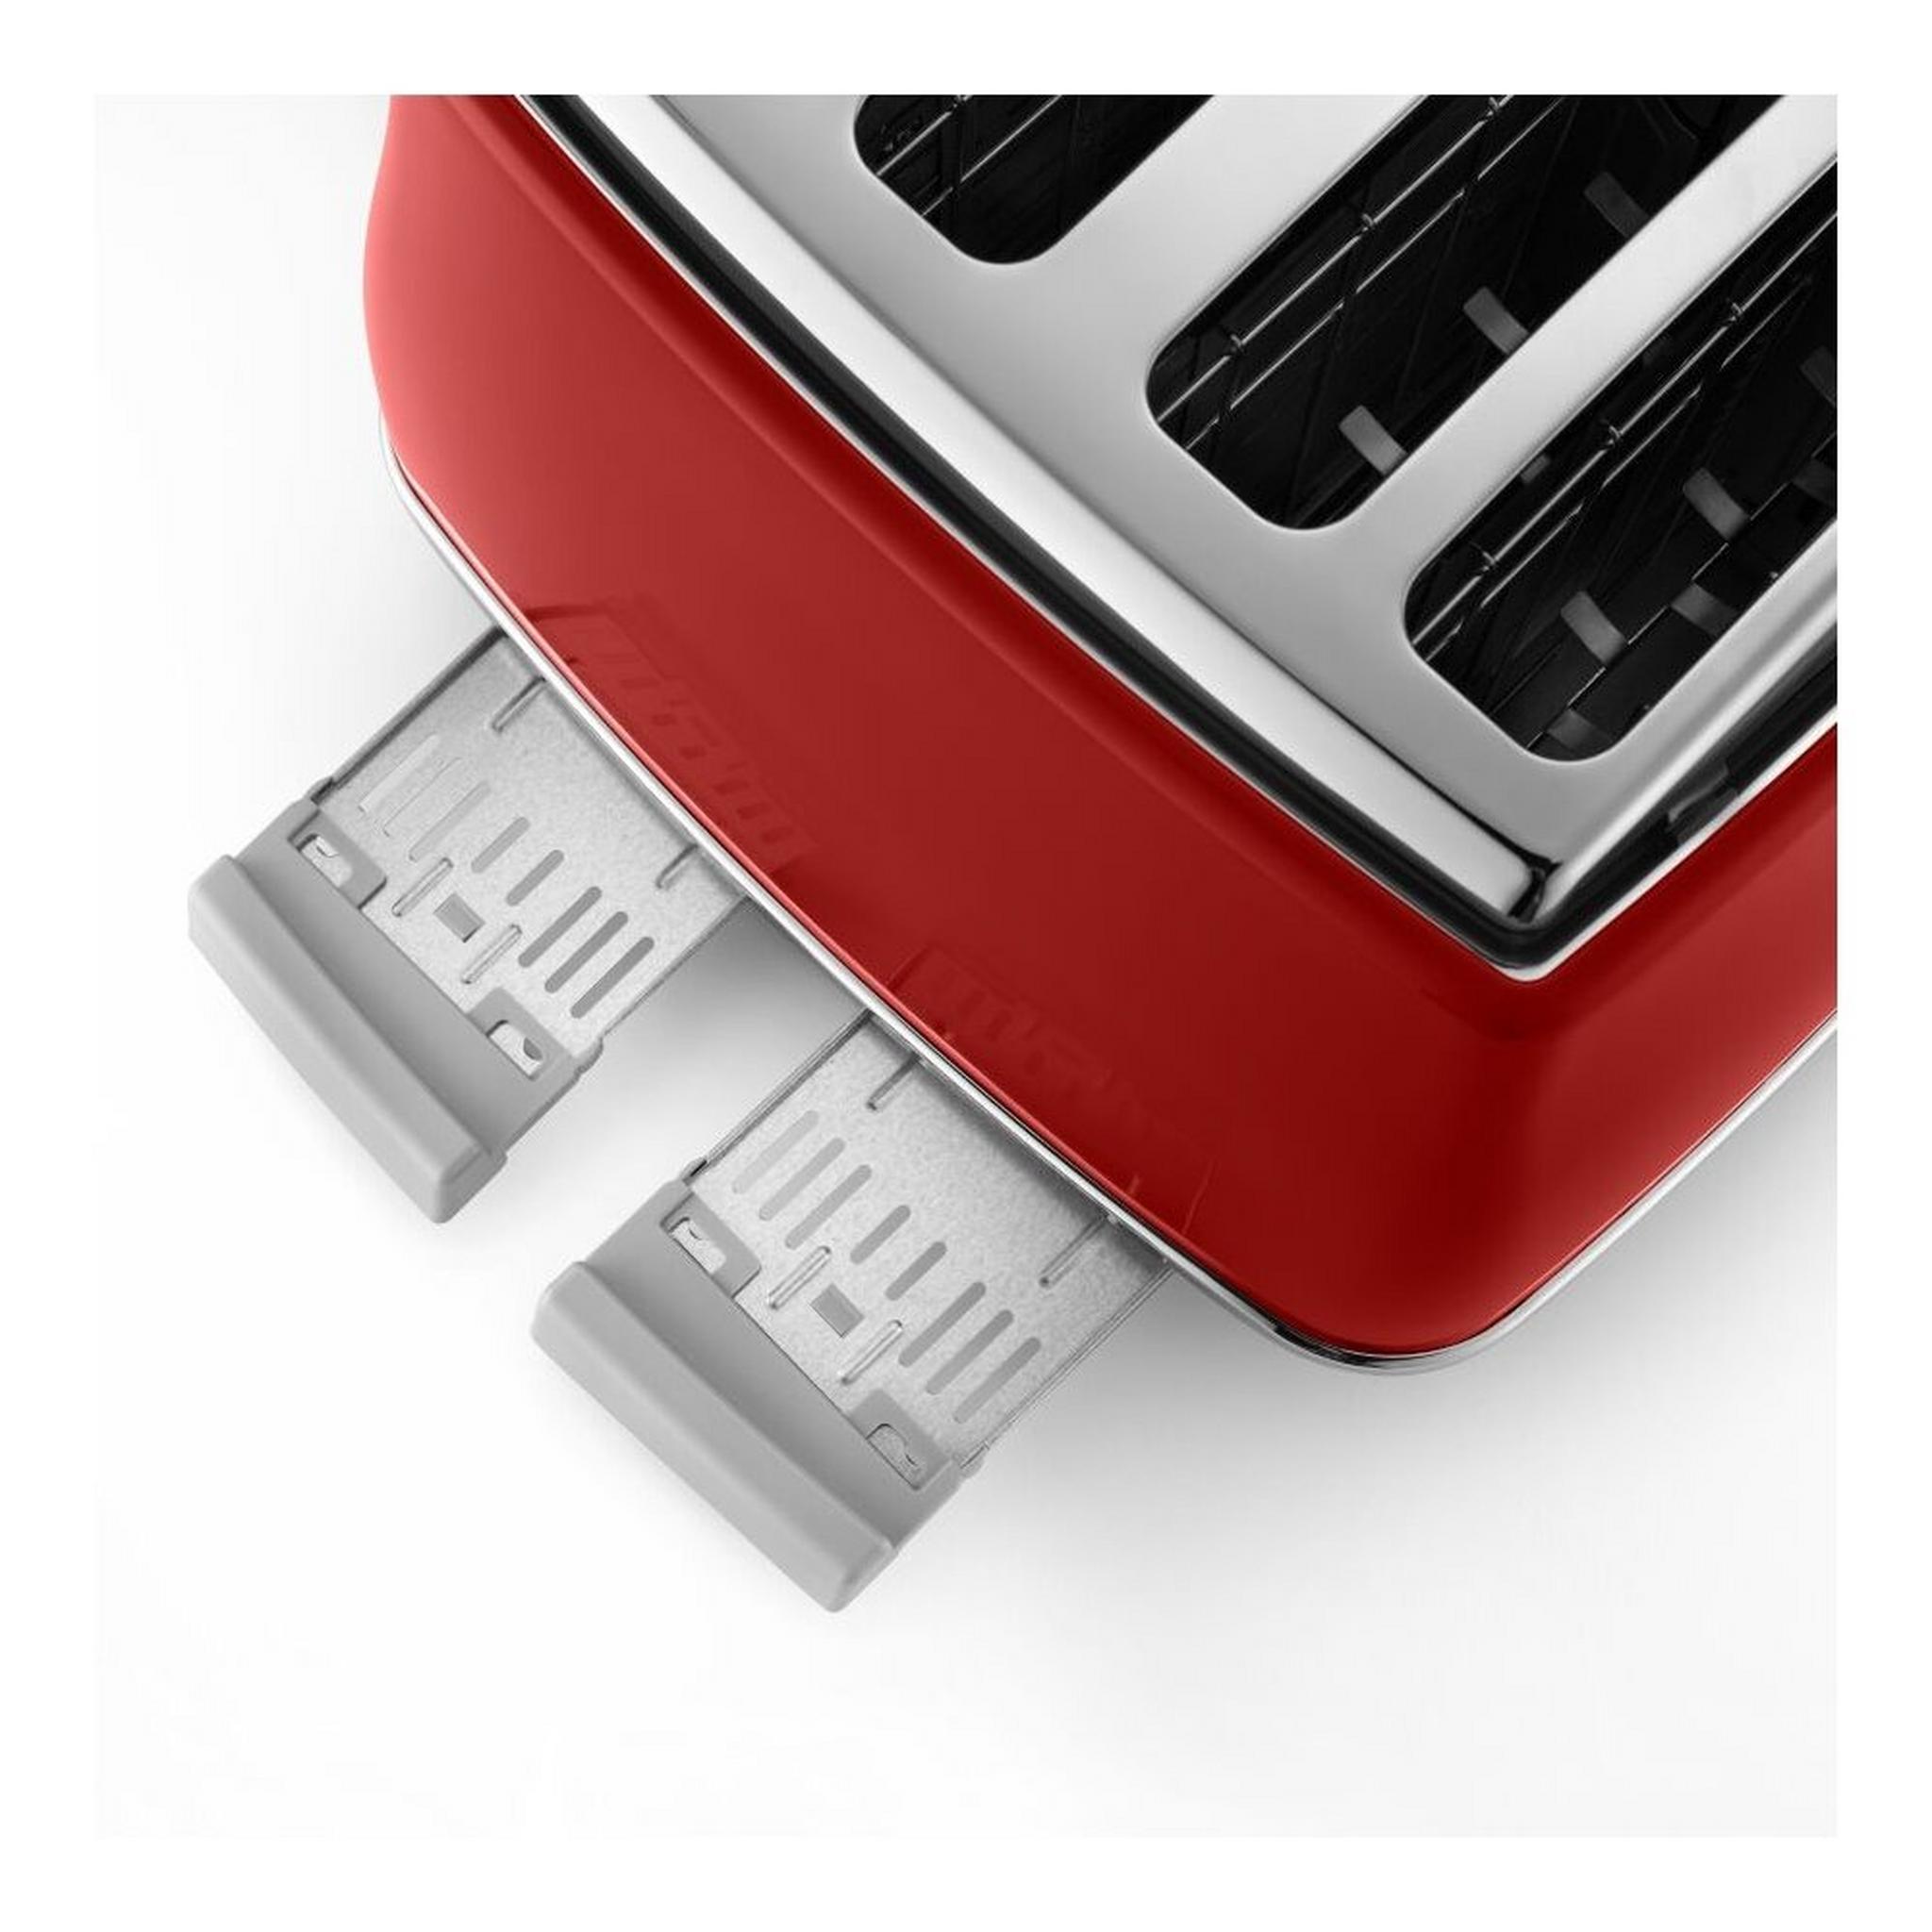 De'Longhi Icona Capitals 4 Slice Toaster Red